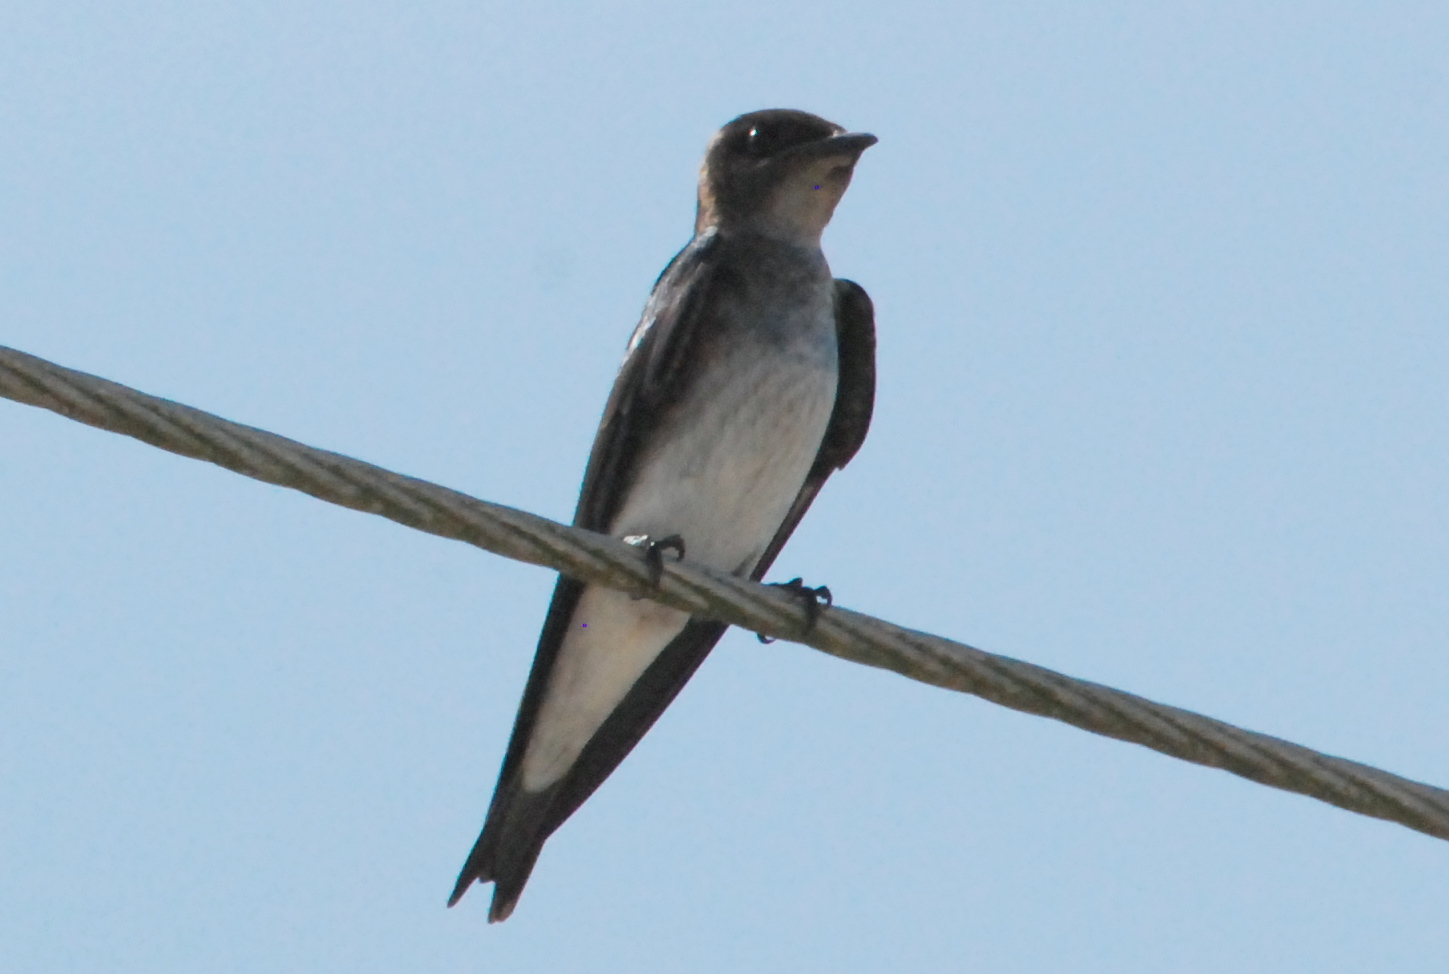 Click picture to see more Gray-breasted Martins.